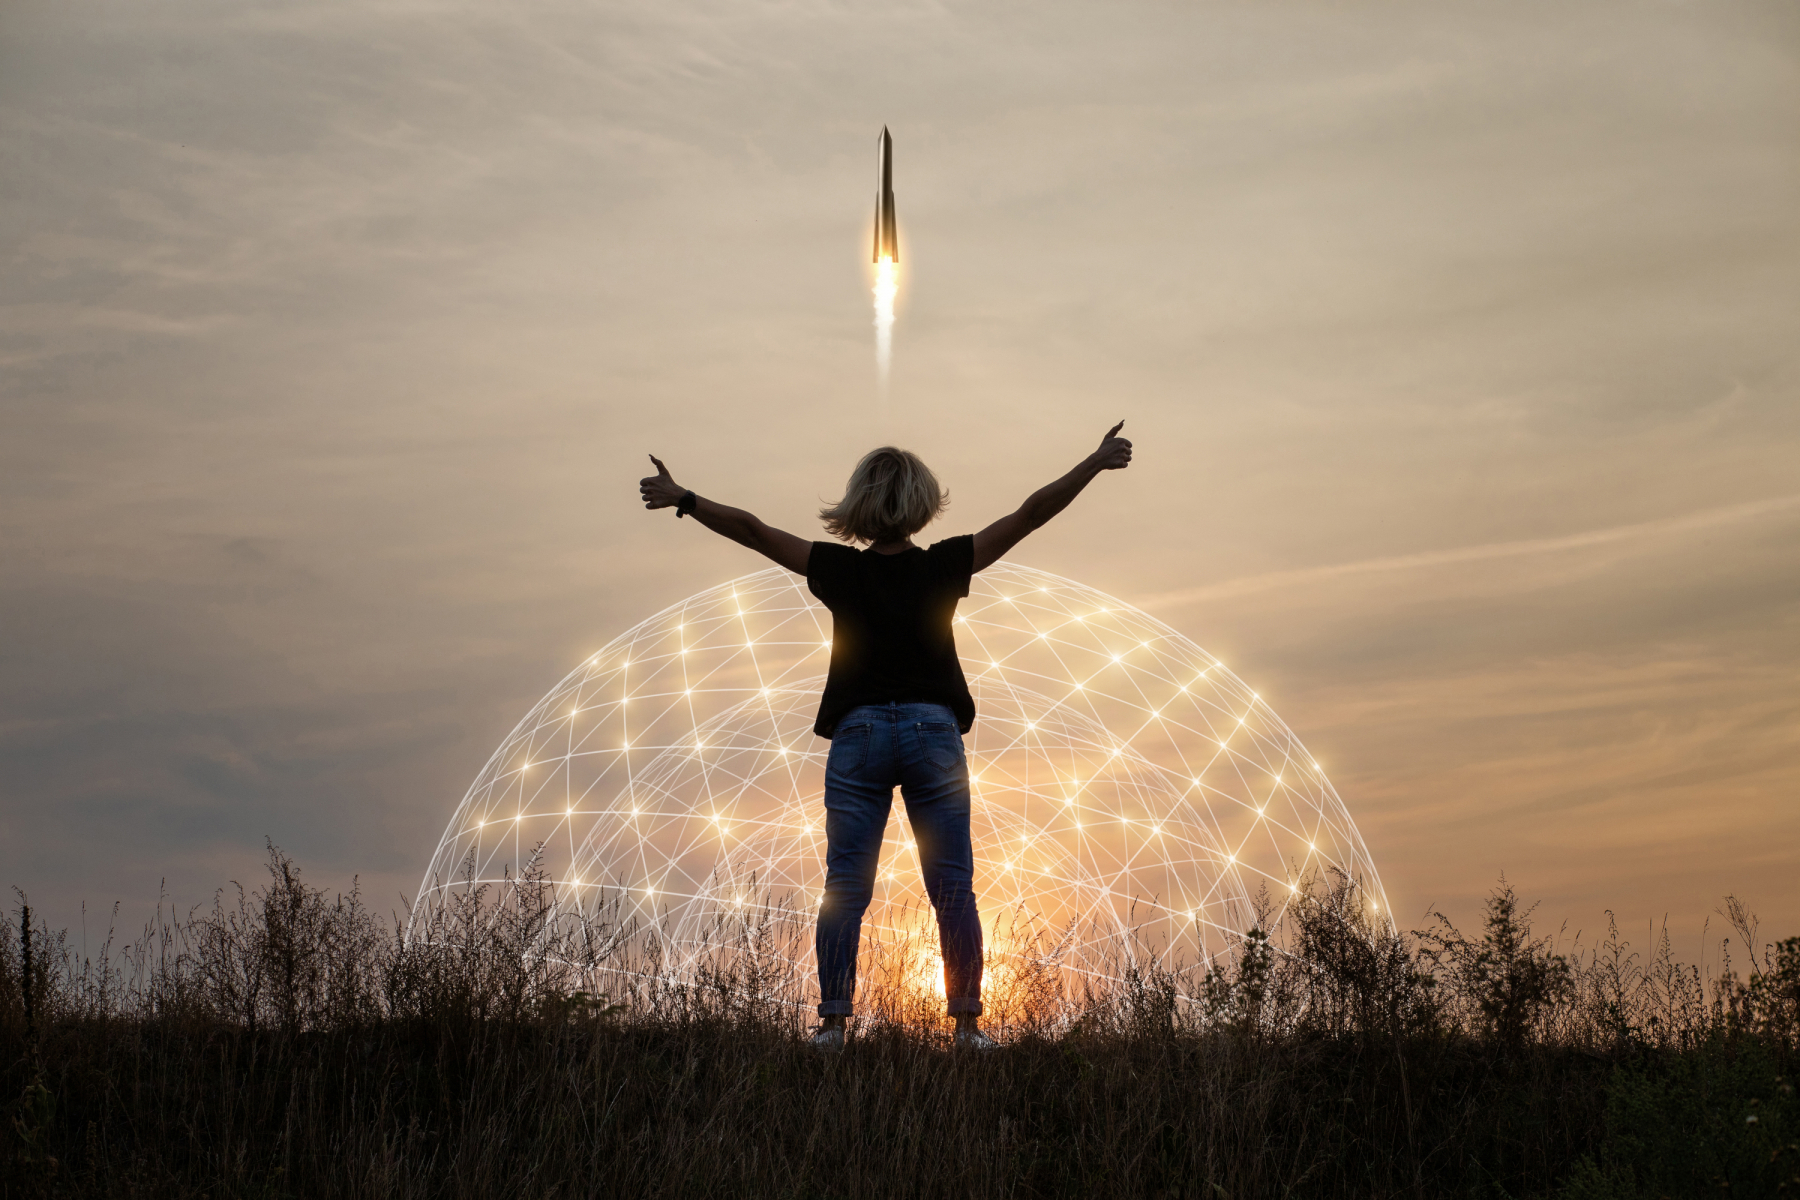 Students see their ideas taking off: “It was amazing what could be achieved in just a couple of days. ESA supported us all the way and certainly inspired many of us to go on an entrepreneurial journey after studying.” MA student, Kristina Wageck (Image credit: Shutterstock) 